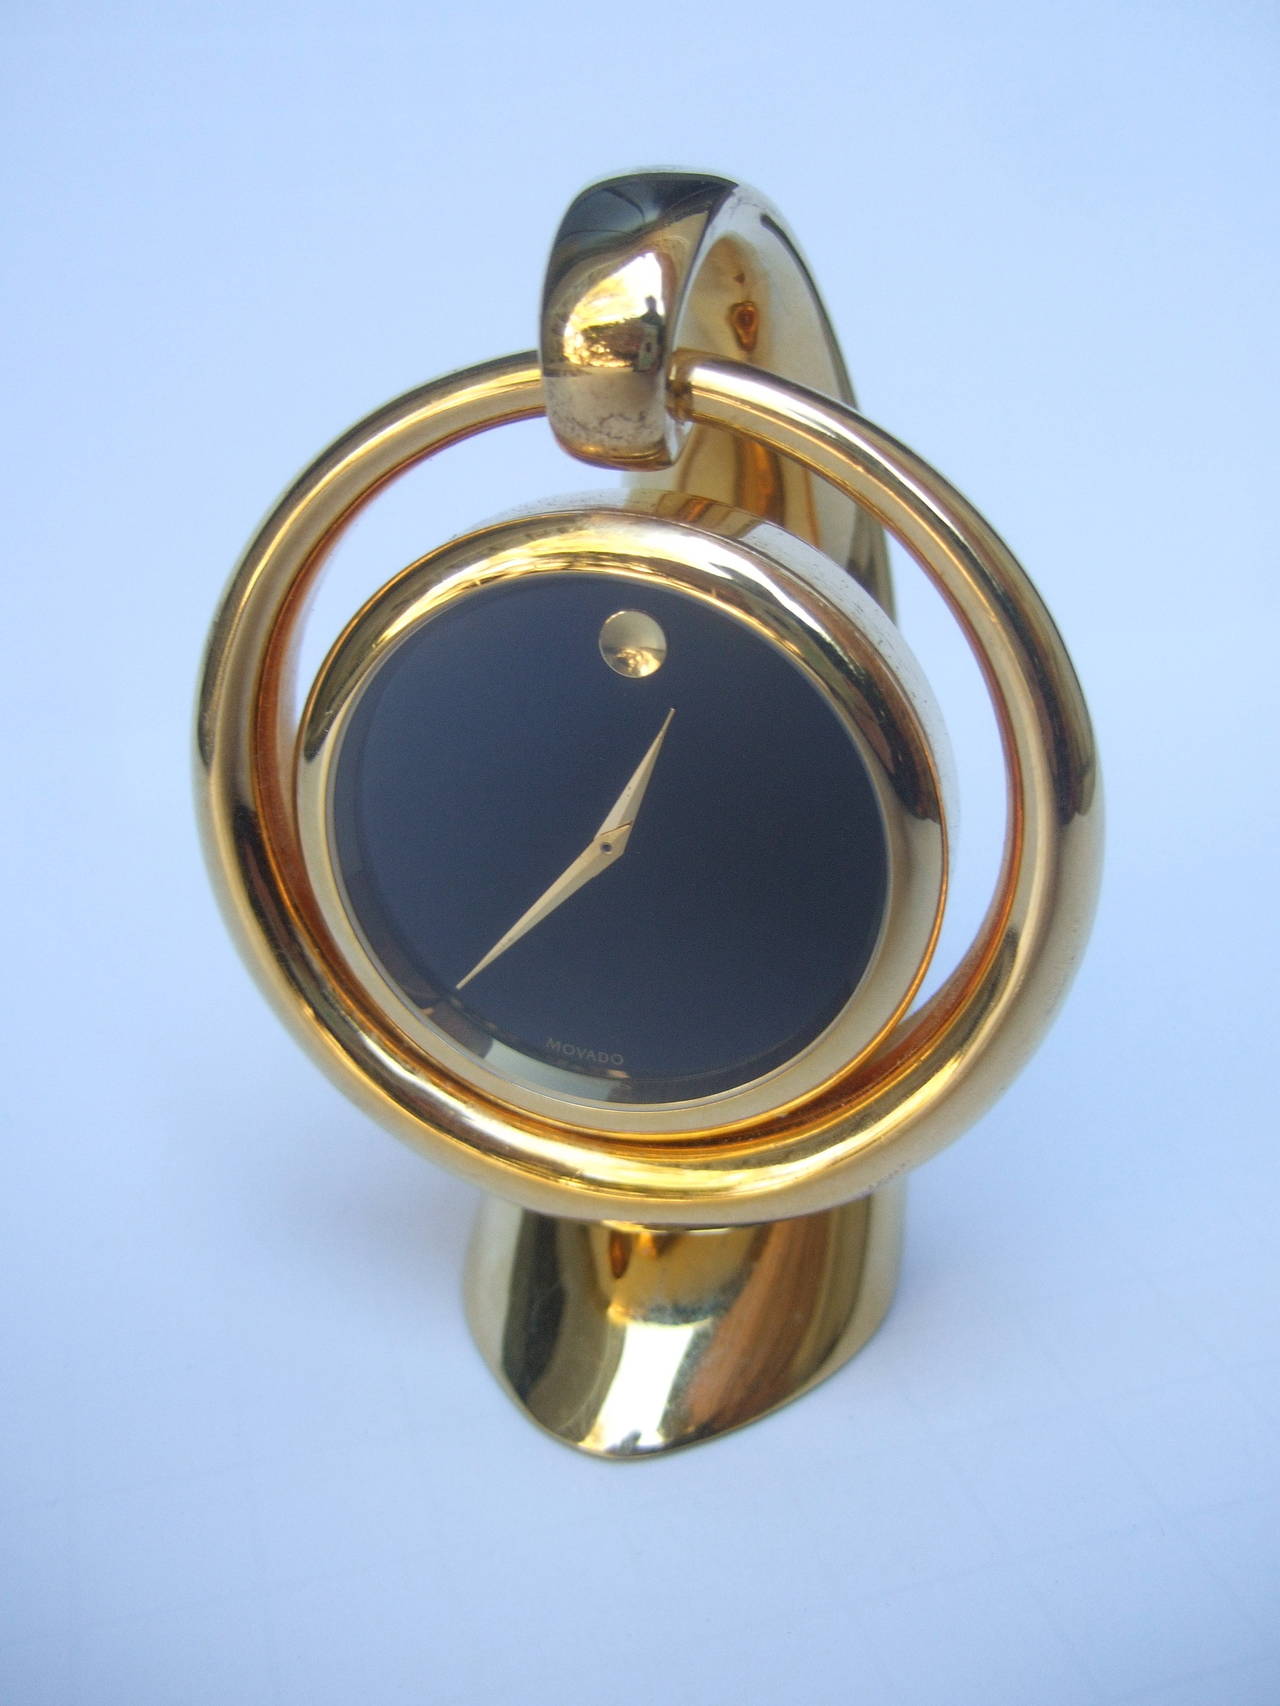 Movado sleek gilt metal diminutive desk clock 
The elegant clock is designed with Movado's signature face dial
The compact circular clock mechanism is suspended from the curved base
The iconic black face dial is stamped Movado 

The stylish